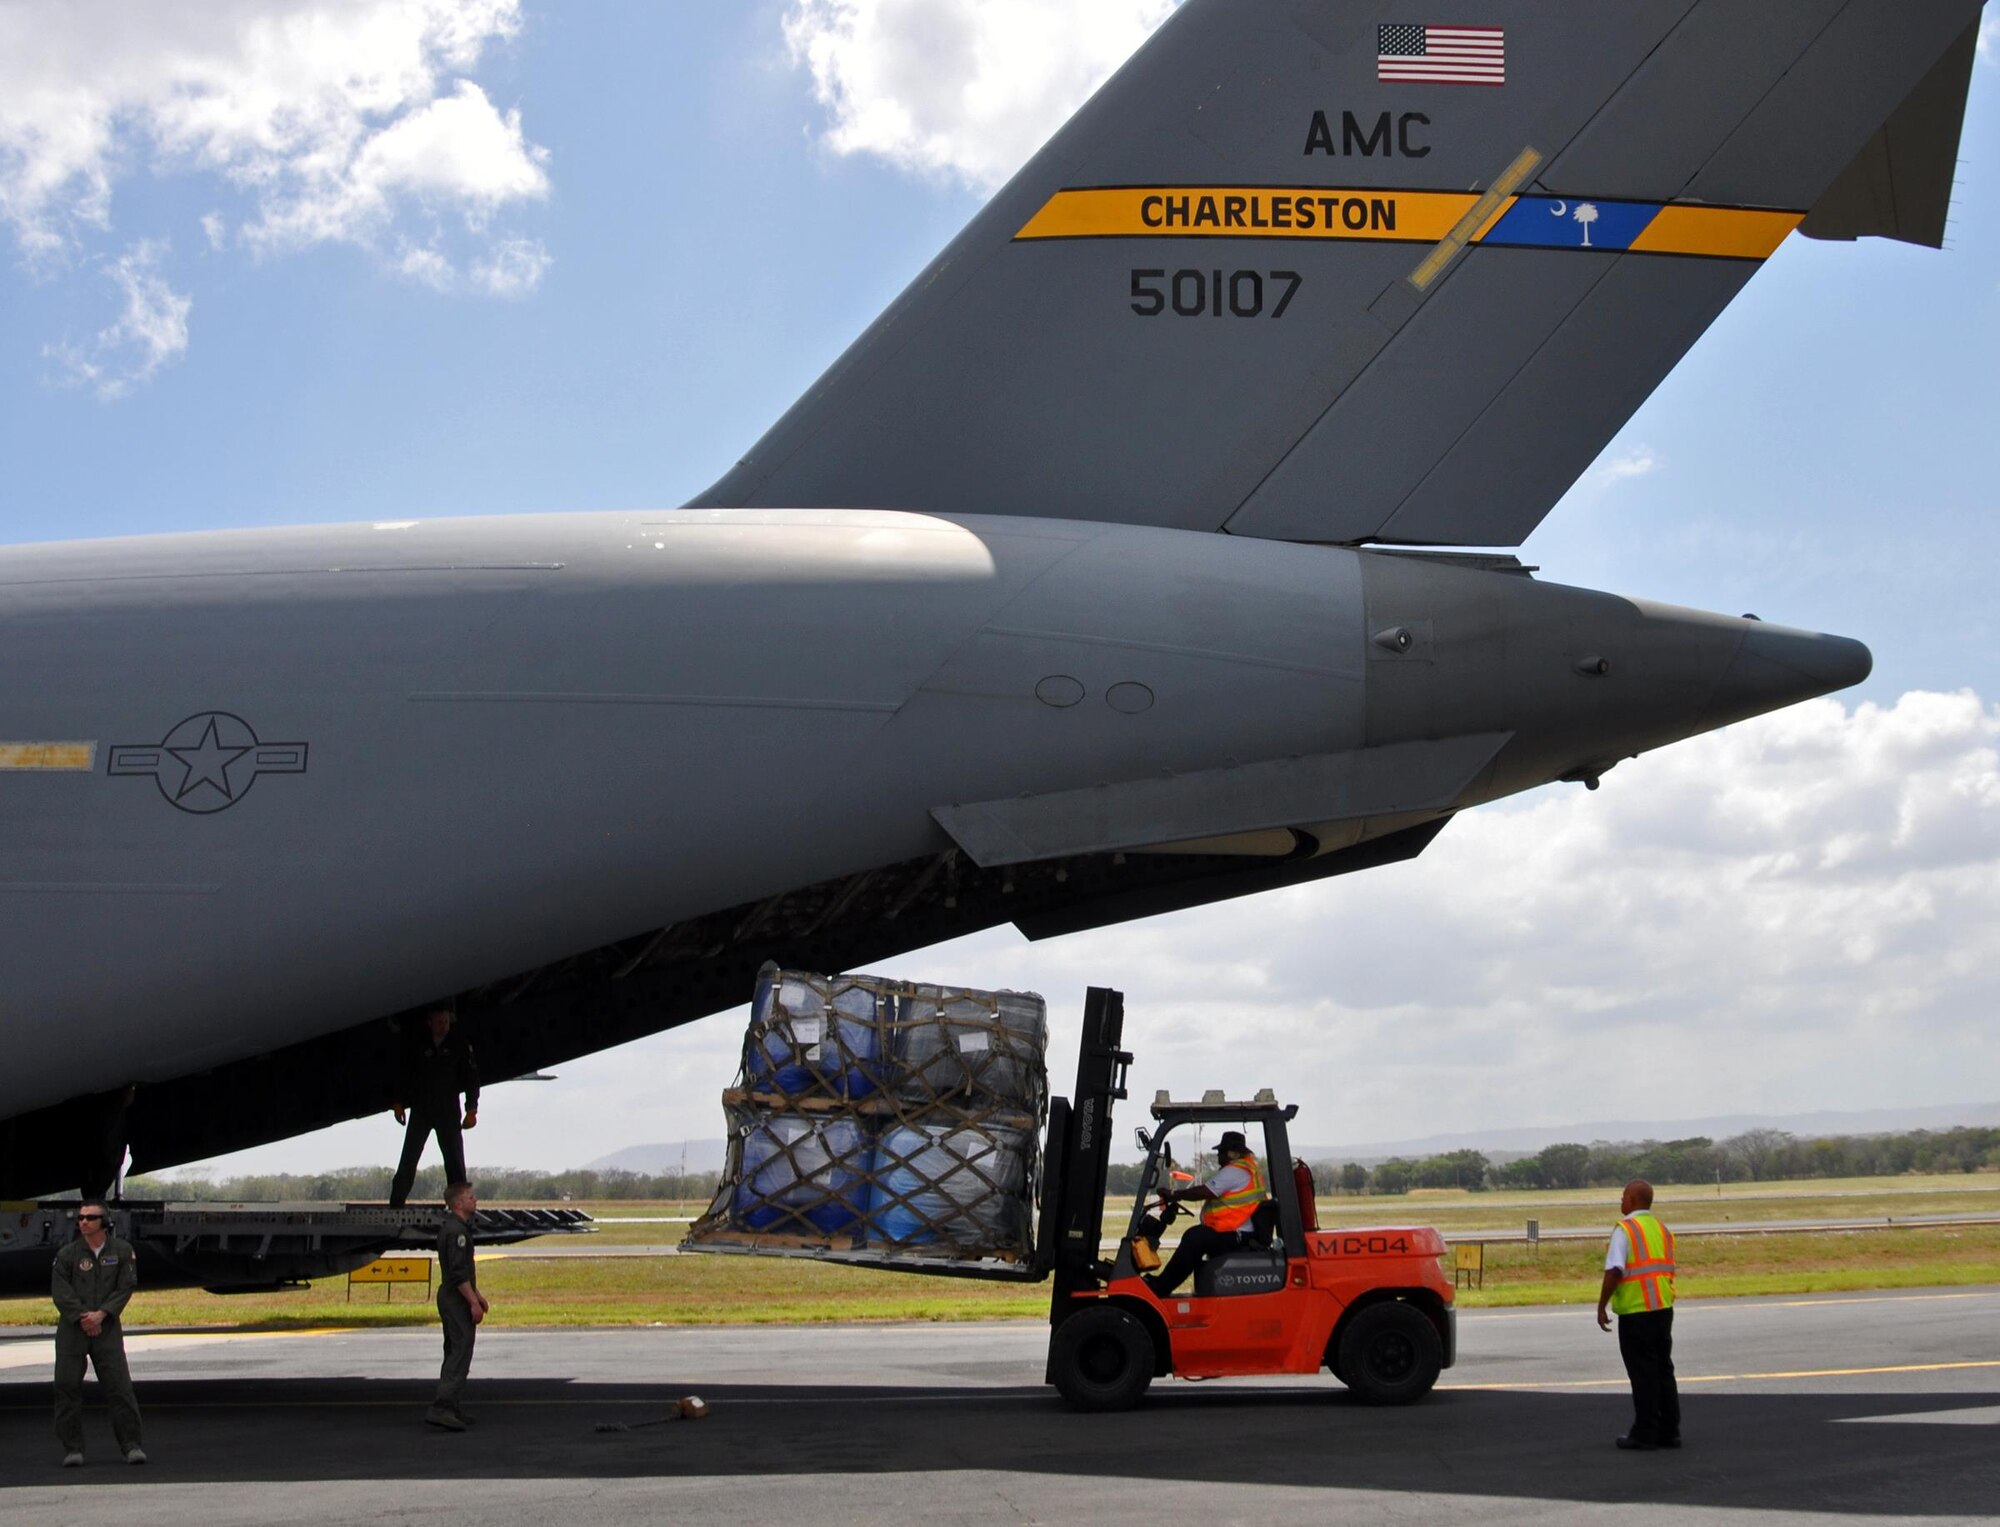 Palletized humanitarian aid cargo is offloaded from a Joint Base Charleston C-17 aircraft in Managua, Nicaragua, during a 315th Airlift Wing training mission, February 5, 2017.  The cargo, which was donated by groups within the U.S., was delivered as part of the Denton program, which allows for empty space on military cargo planes to be used for humanitarian relief.  (U.S. Air Force photo by Maj. Wayne Capps)